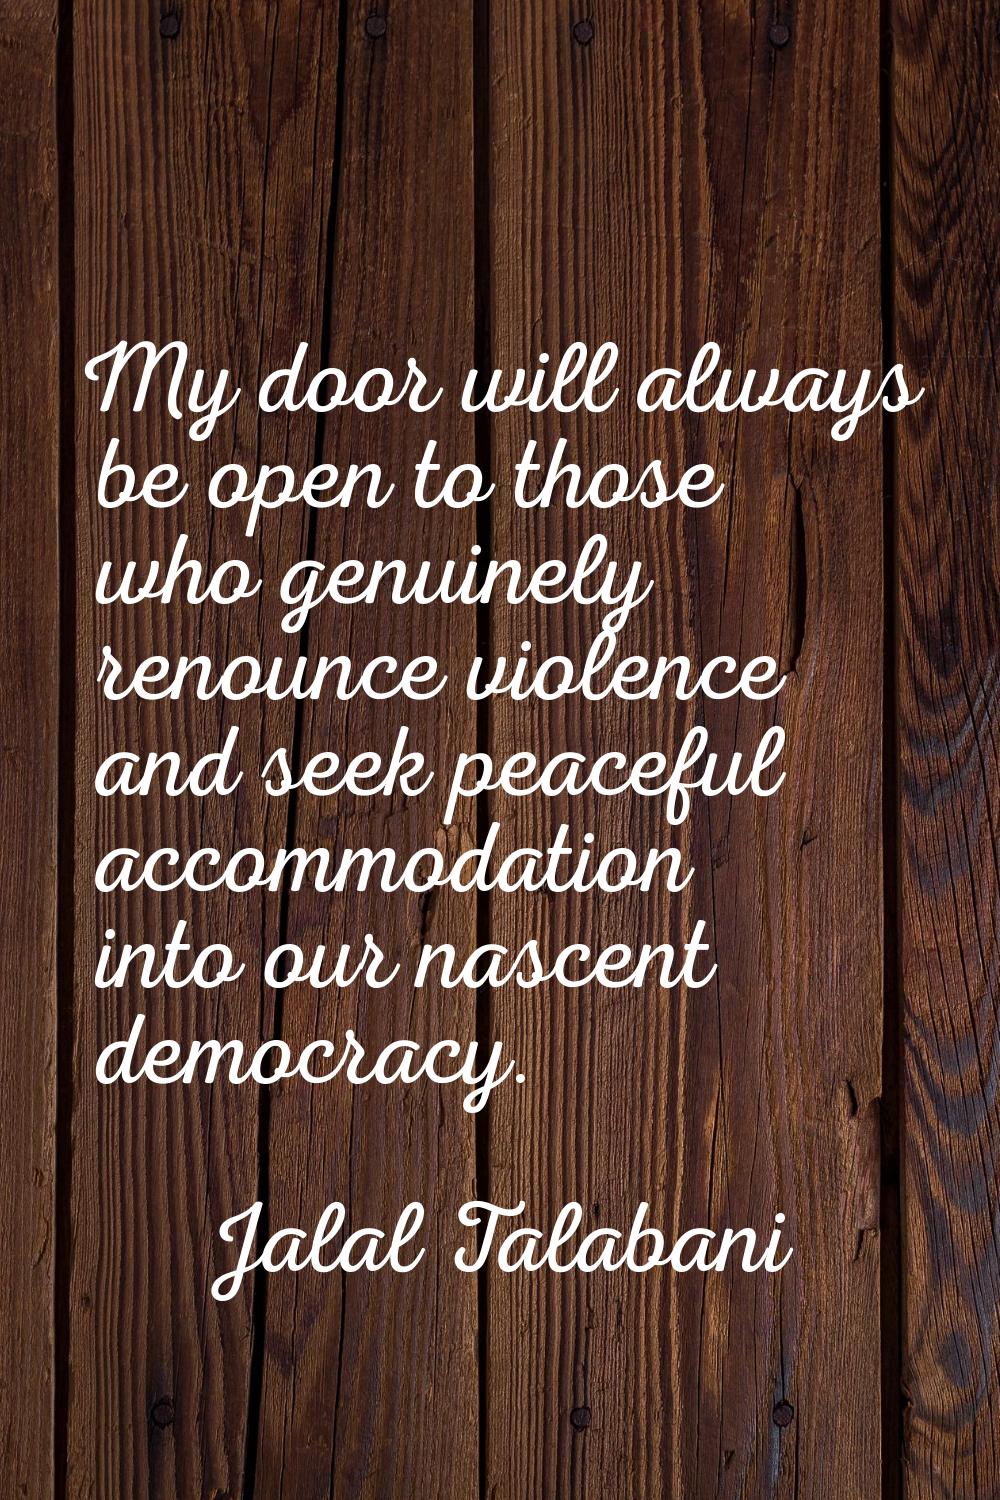 My door will always be open to those who genuinely renounce violence and seek peaceful accommodatio